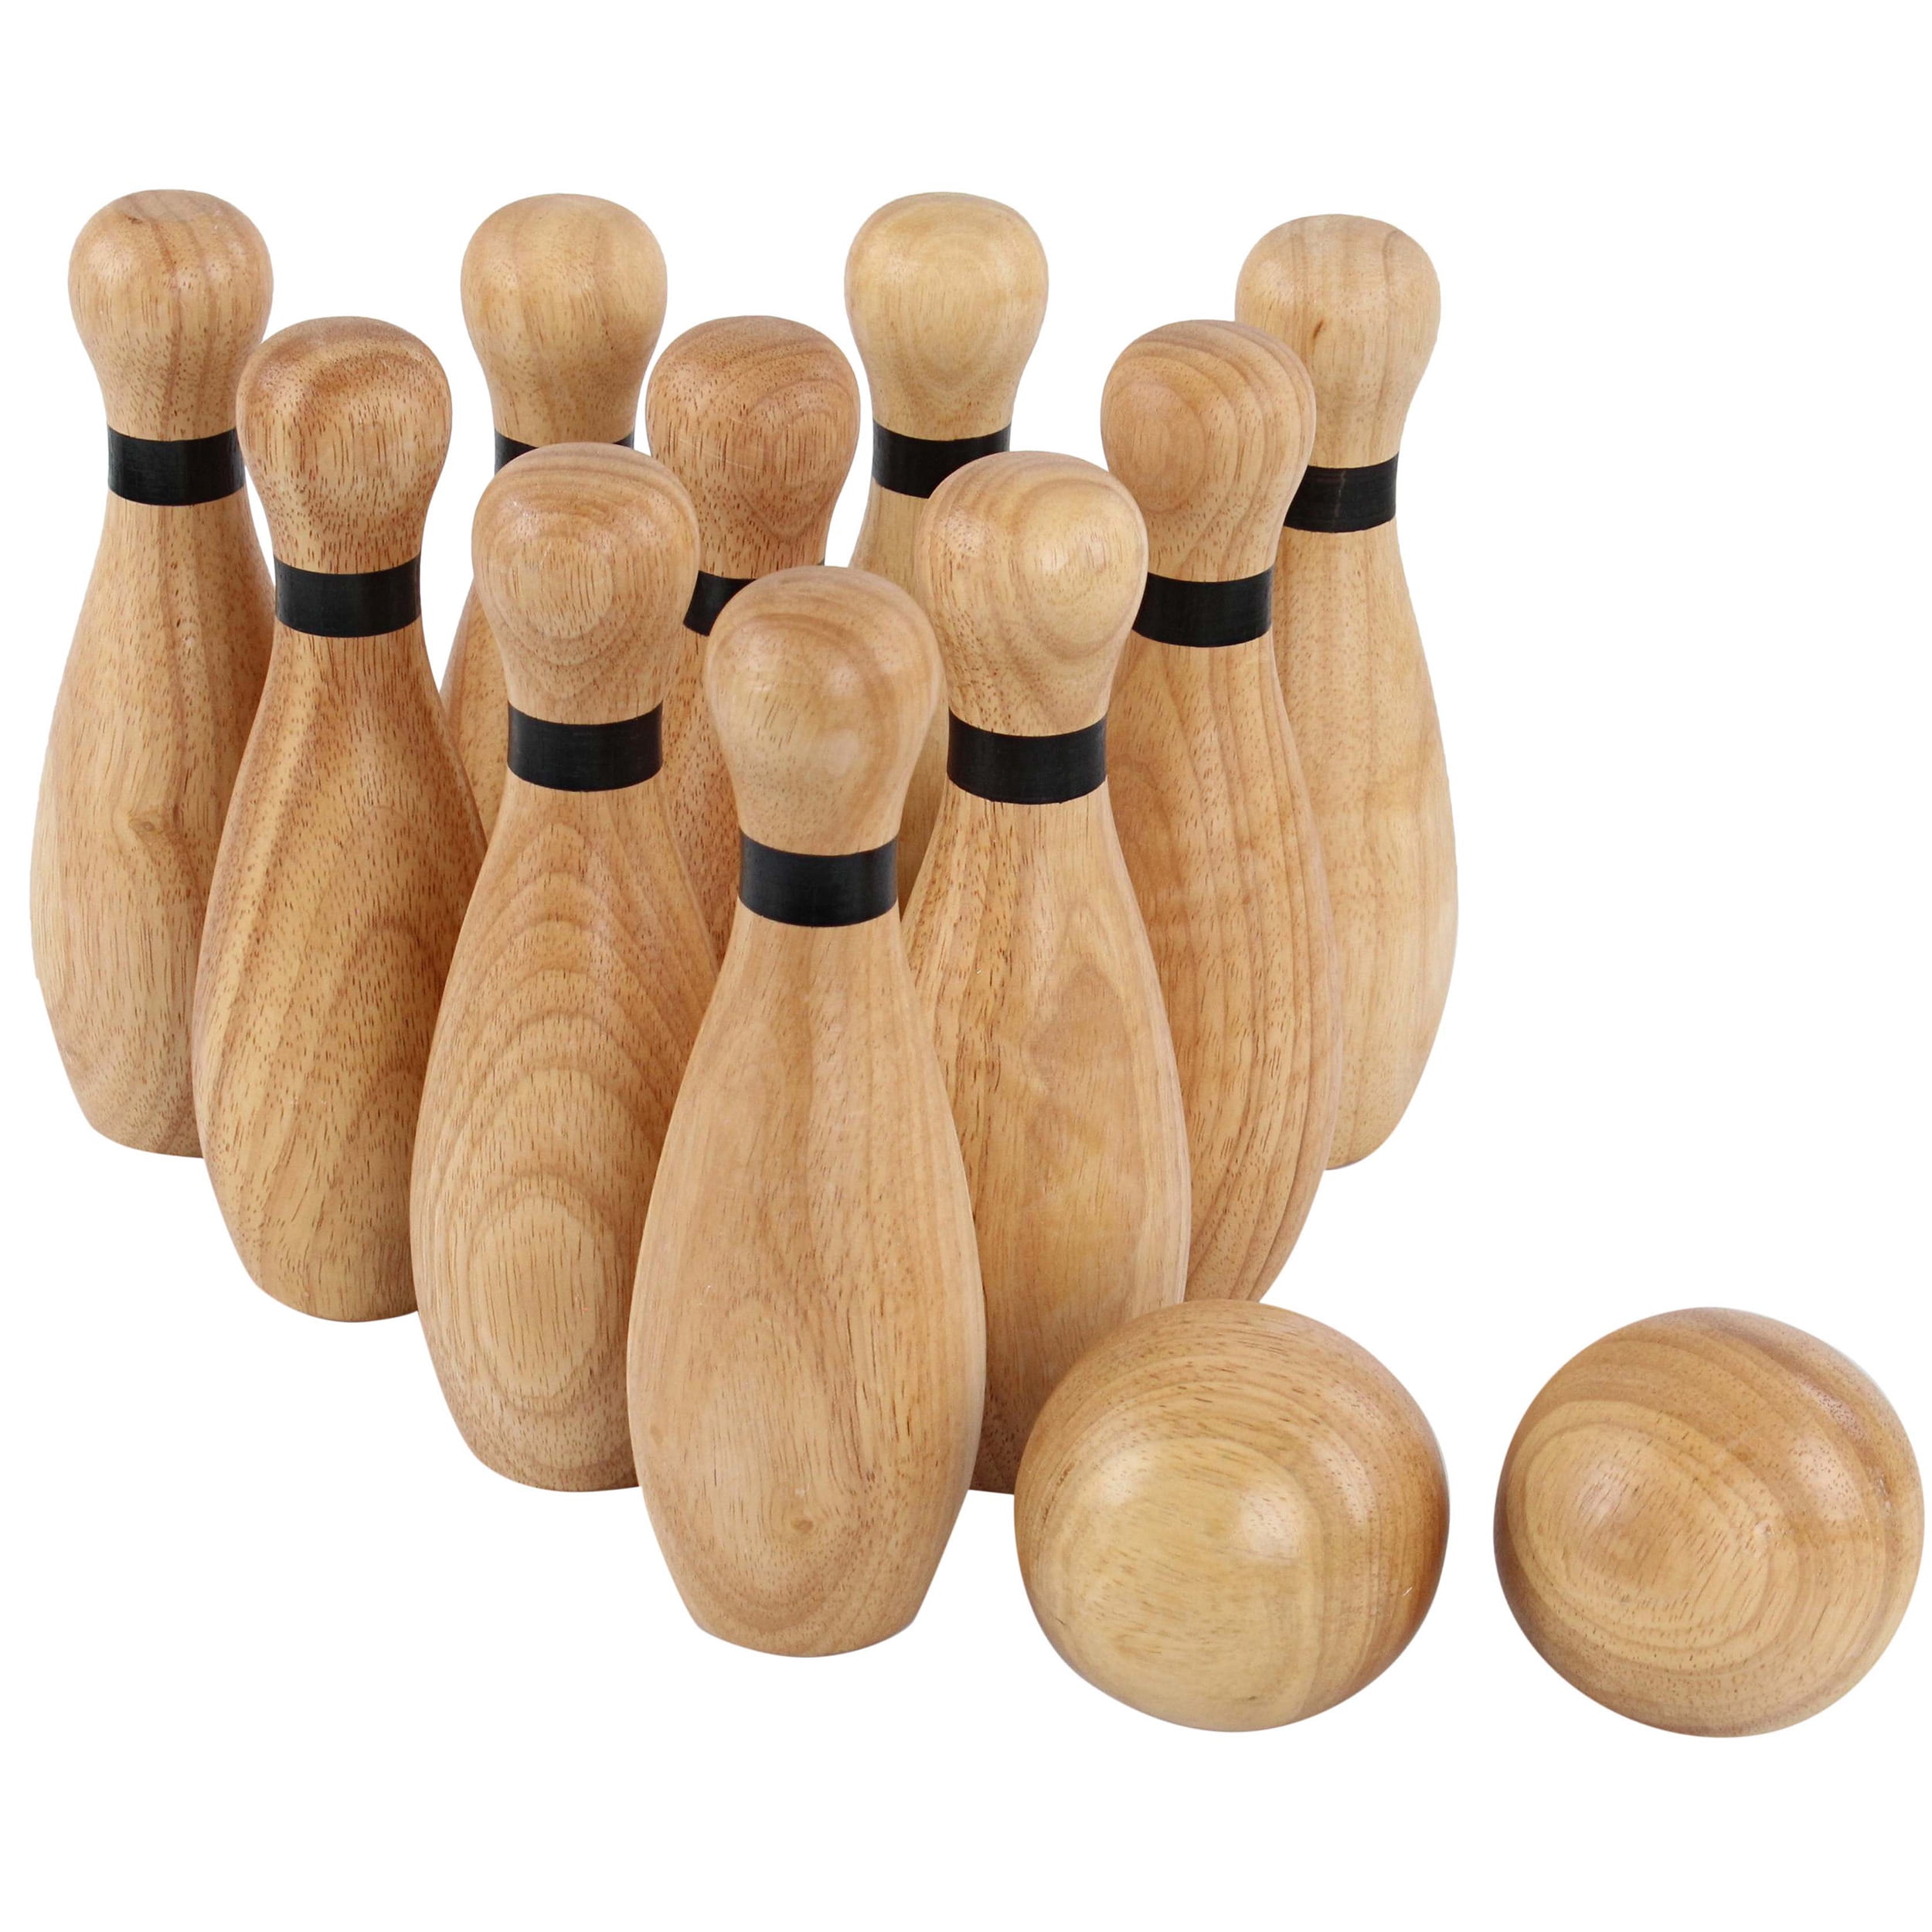 Get Out! Wooden Bowling Set - 12pc Lawn Bowling and Skittle Ball Game